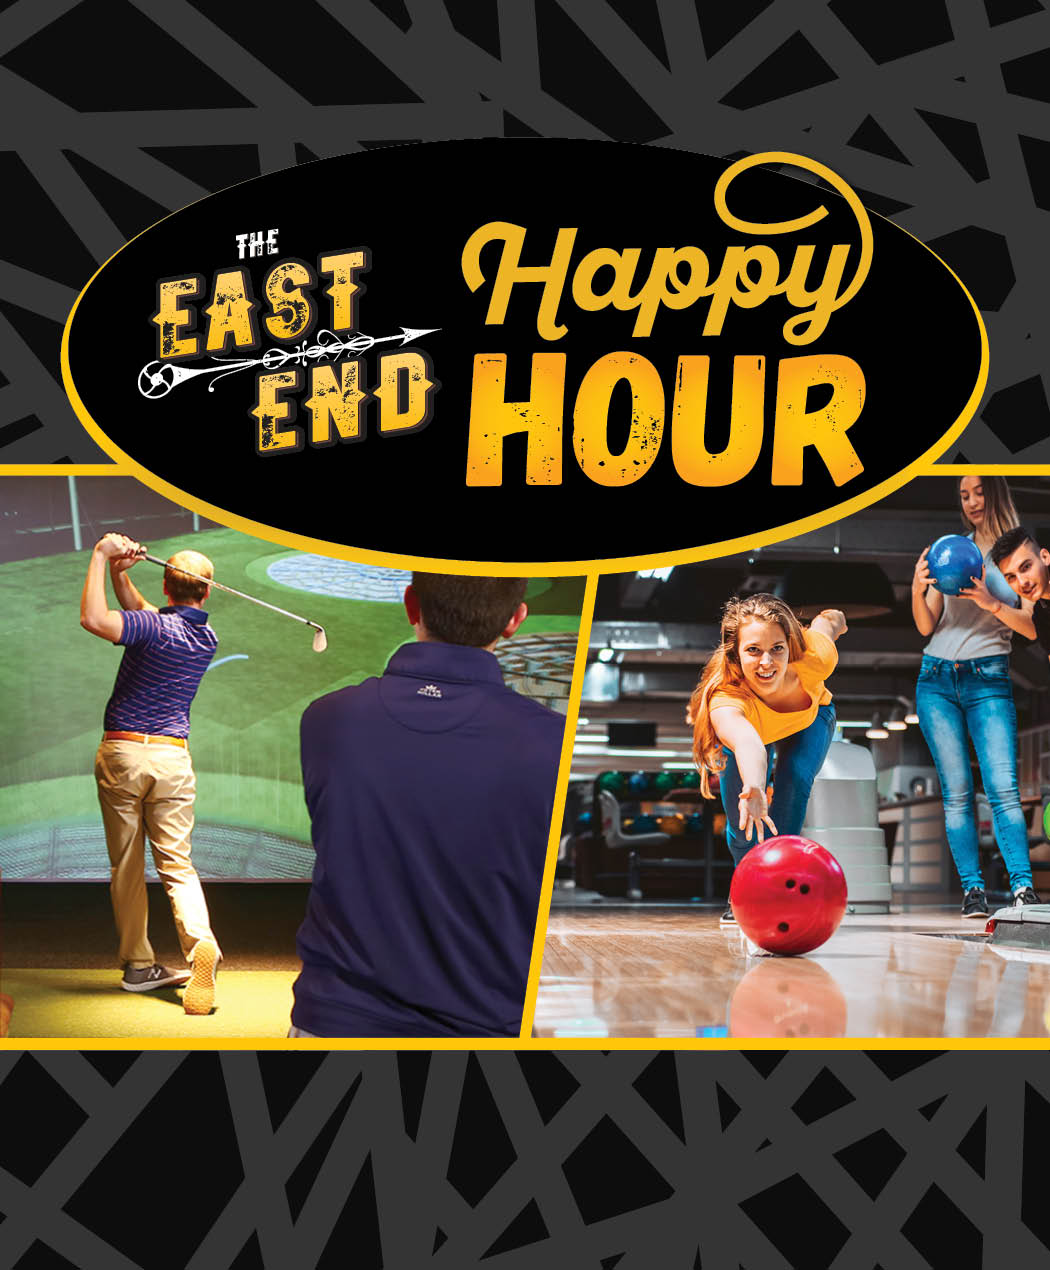 The East End Happy Hour with guests swinging at Topgolf at bowling at the lanes